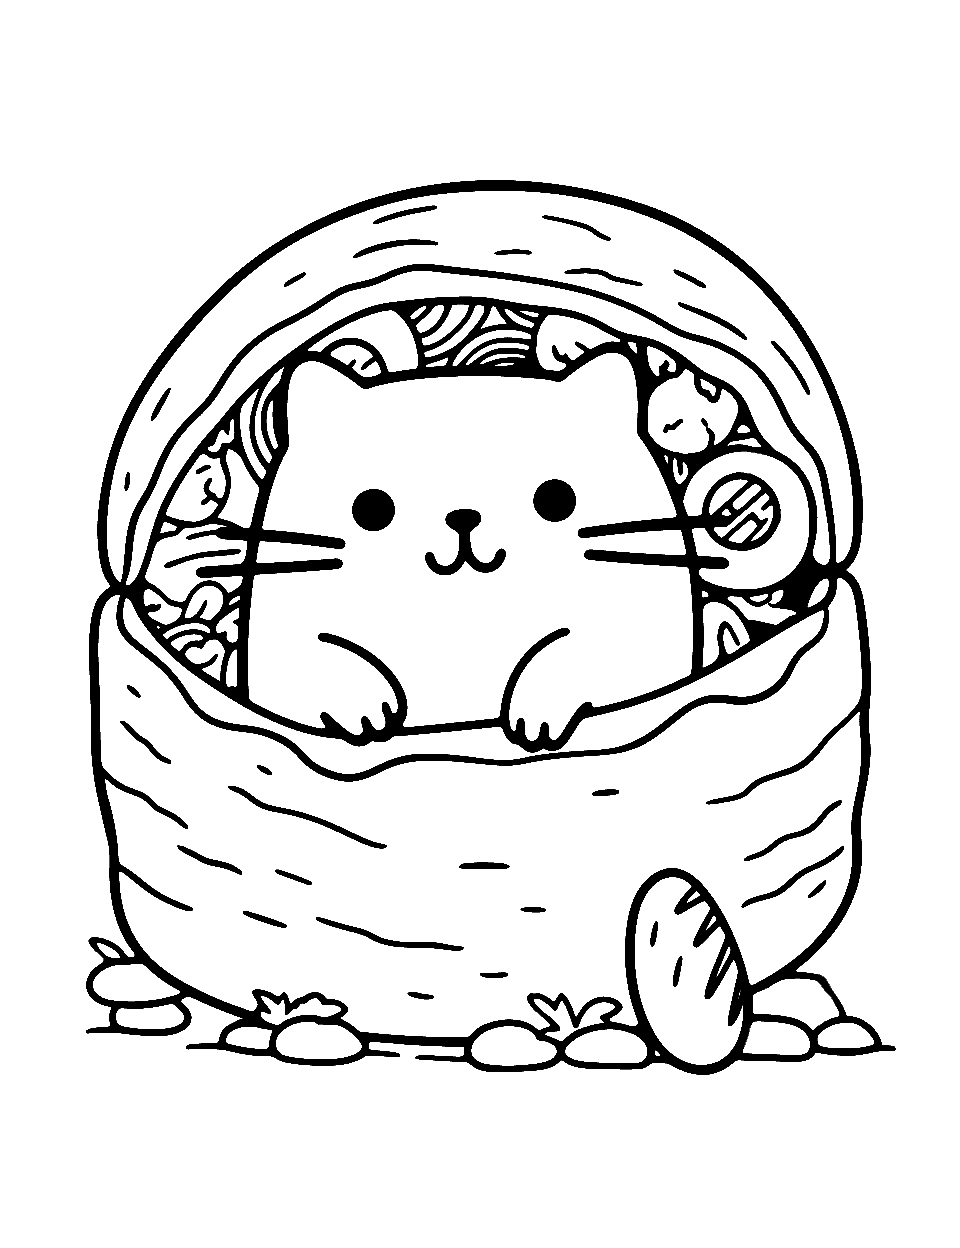 Sushi Delight Coloring Page - Pusheen wrapped inside a sushi roll, peeking out with excitement.